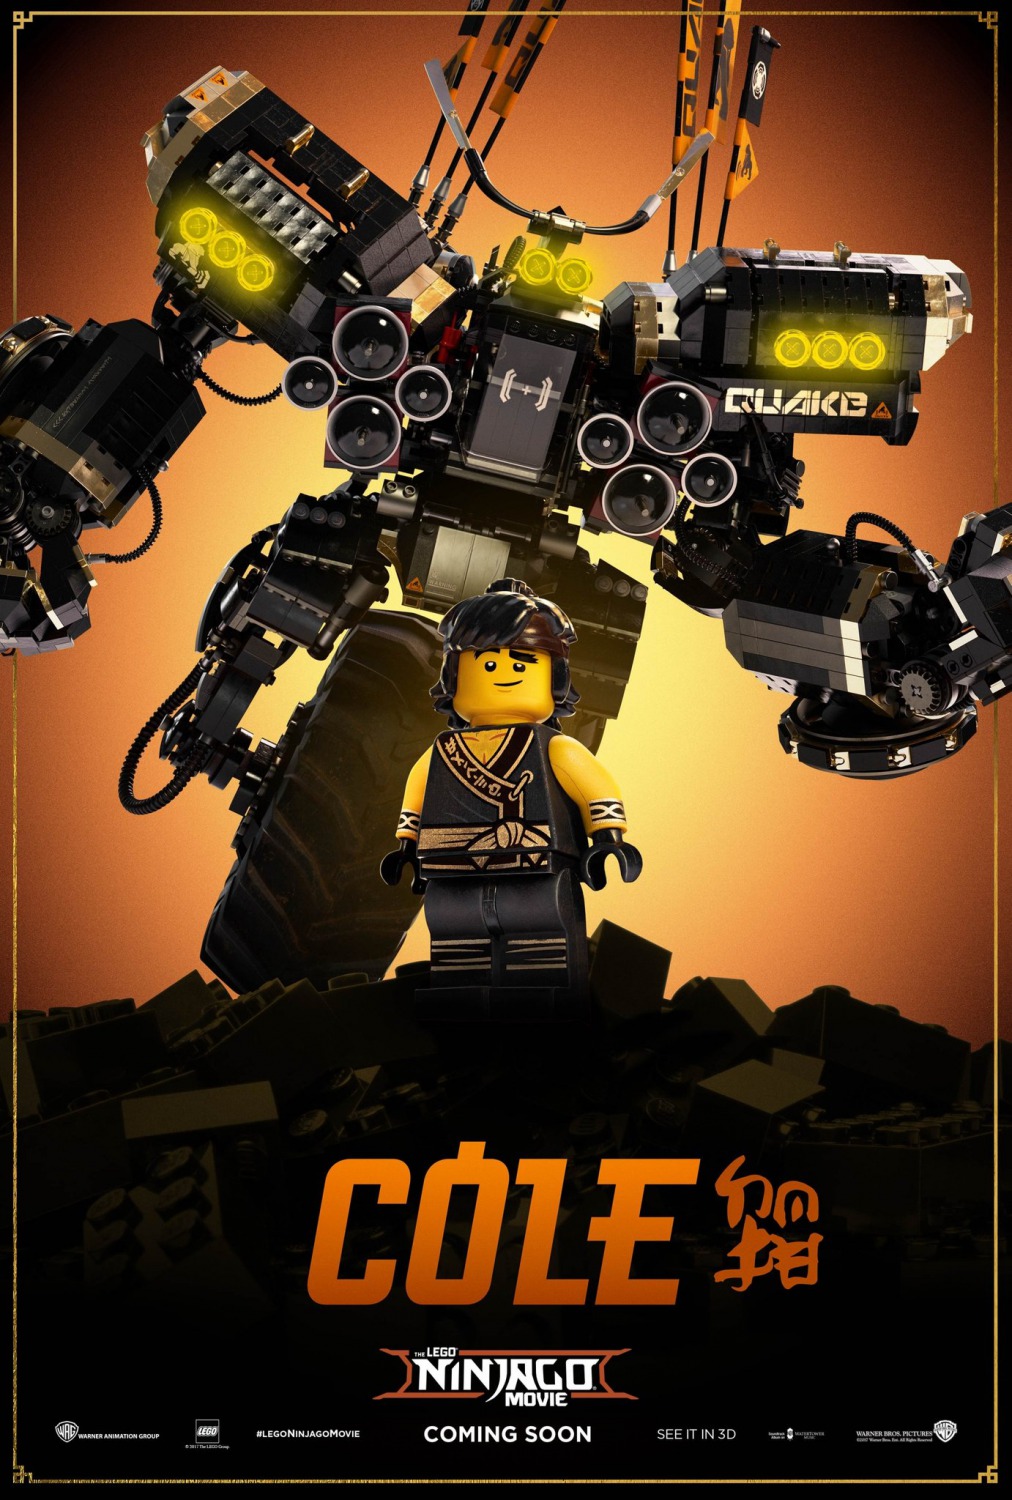 Extra Large Movie Poster Image for The Lego Ninjago Movie (#17 of 36)